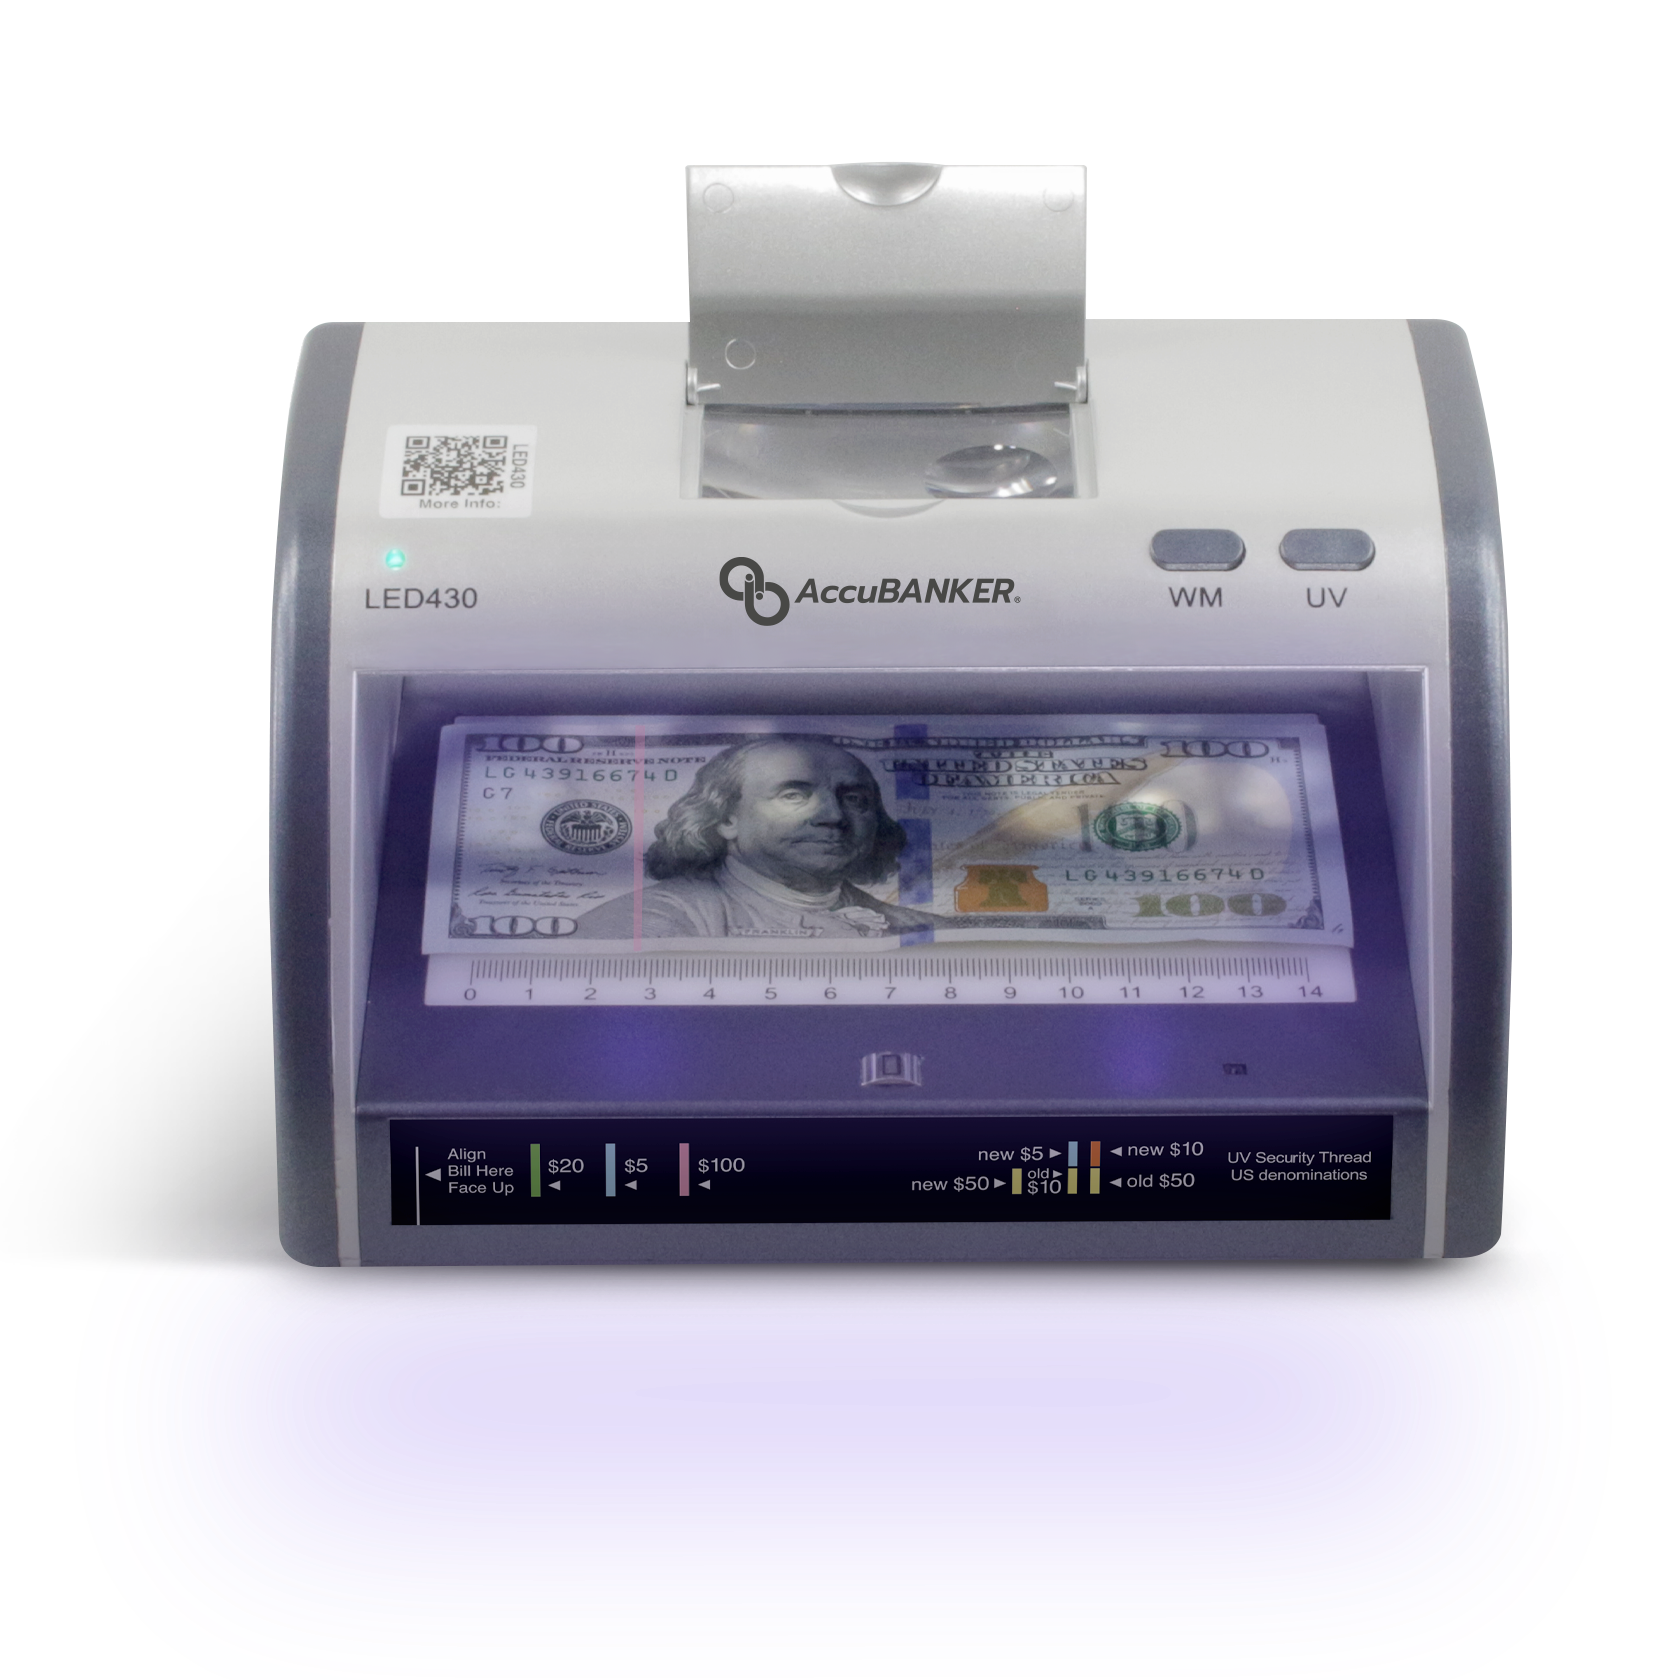 LED430 Counterfeit Bill/ Document Validator with Magnifier 6 Counterfeit Detection Methods